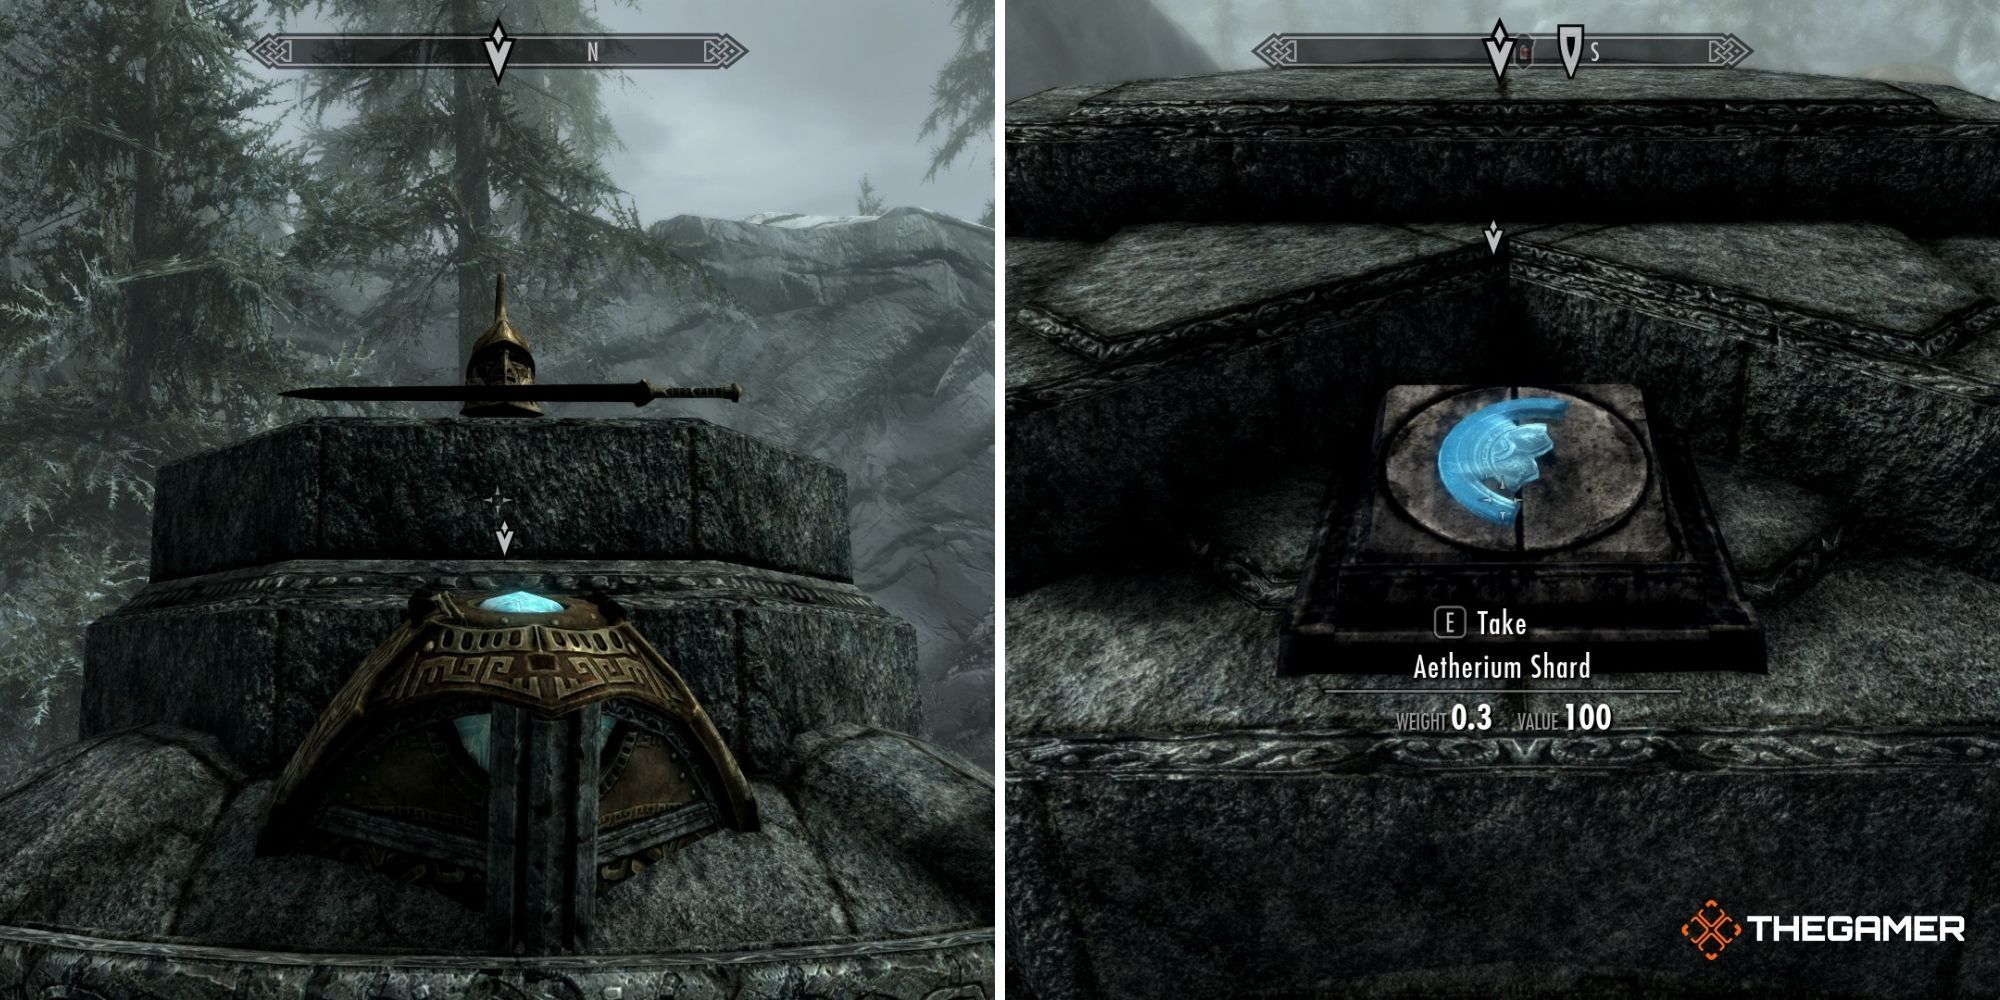 Skryim - Lost to the Ages Quest Walkthrough, Deep Folk Crossing (left - Dwarven Helmet and Sword) (right - Aetherium Shard)